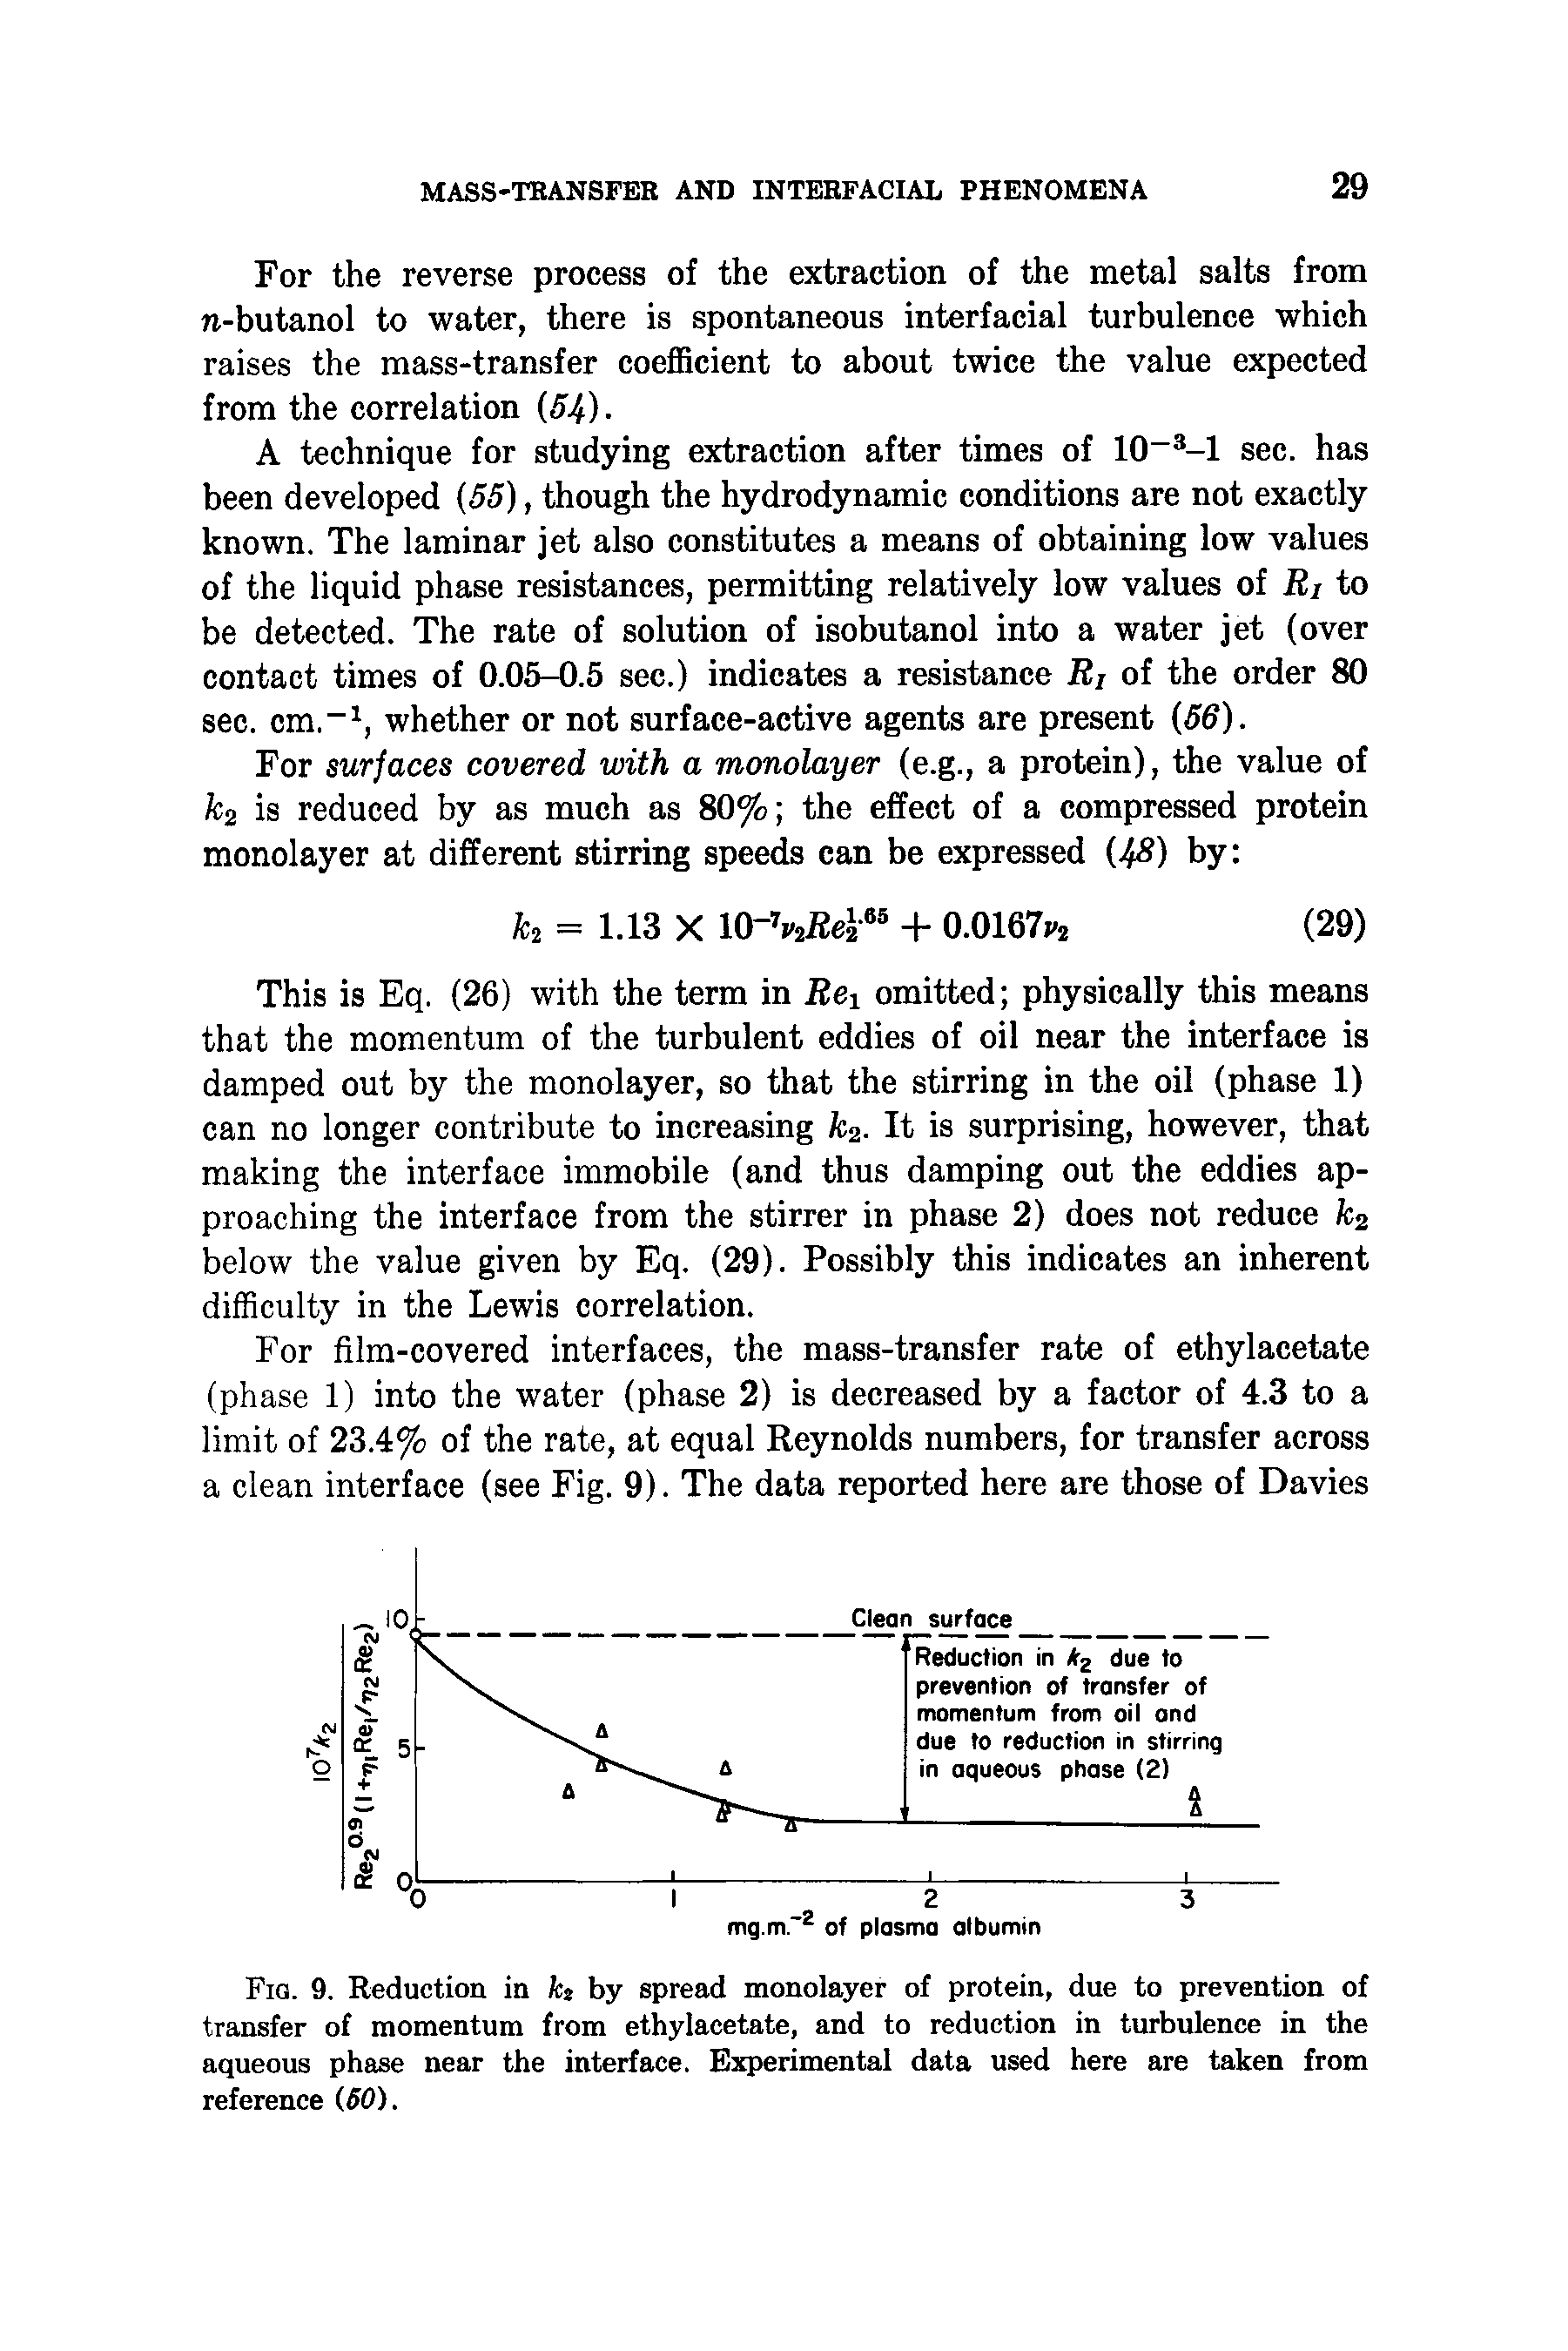 Fig. 9. Reduction in kt by spread monolayer of protein, due to prevention of transfer of momentum from ethylacetate, and to reduction in turbulence in the aqueous phase near the interface. Experimental data used here are taken from reference (60).